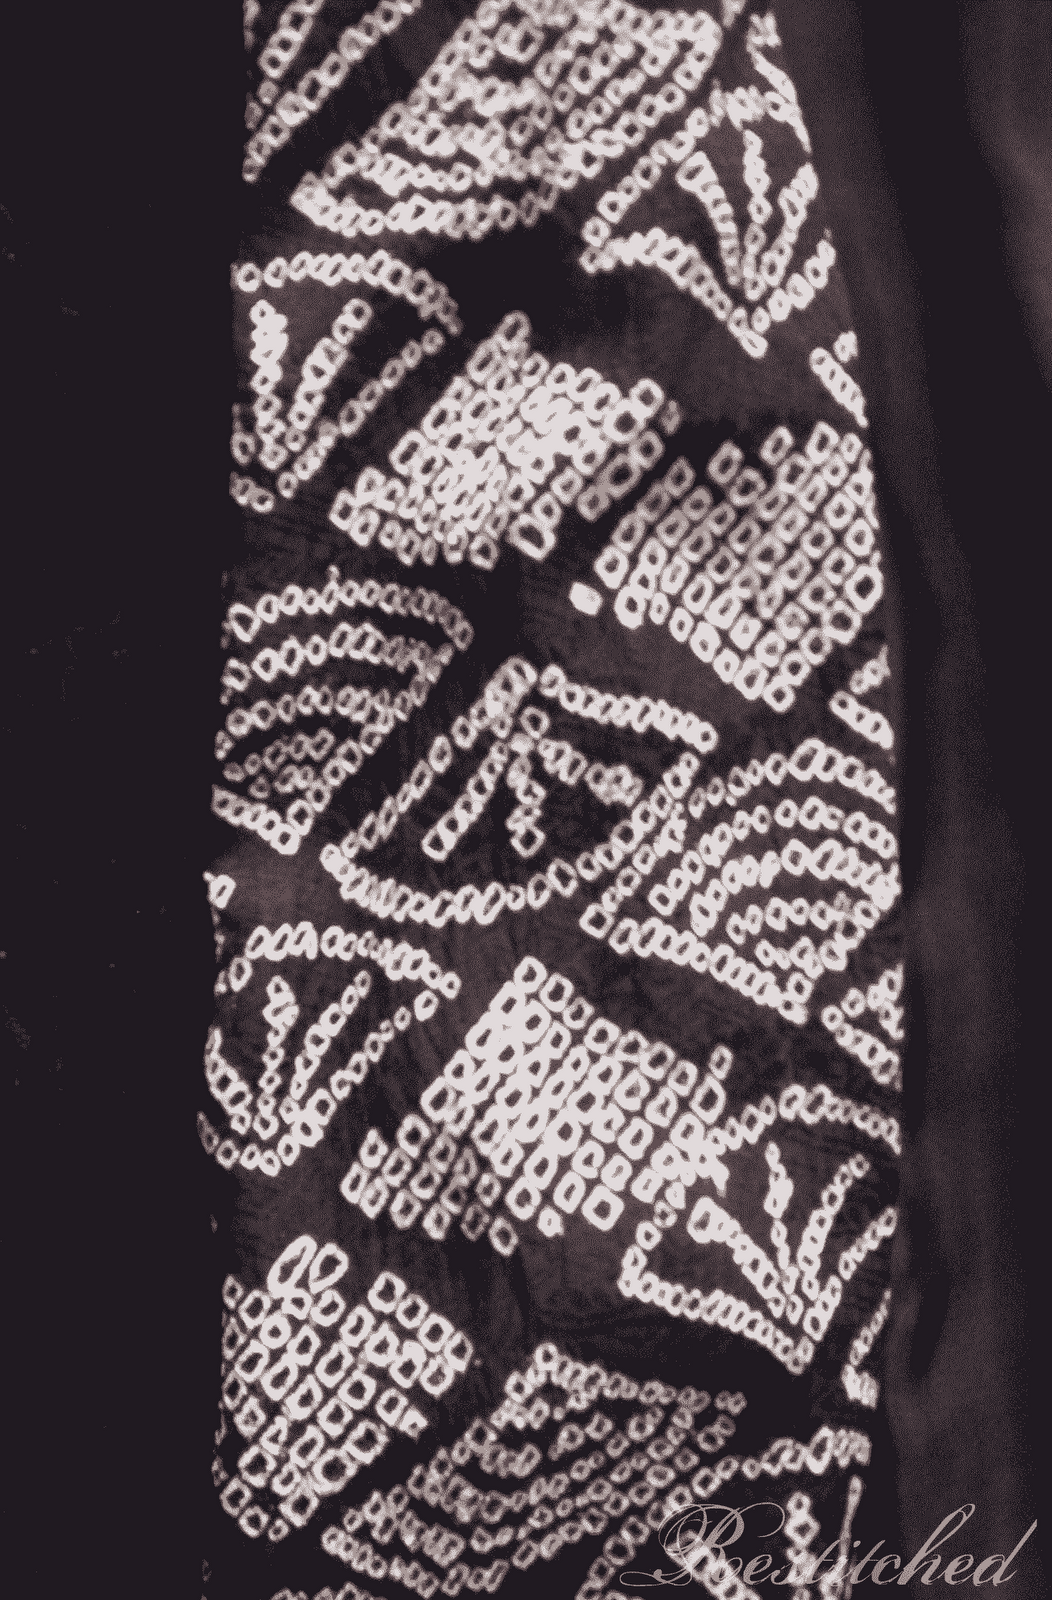 [silk-lined-coat-detail.gif]